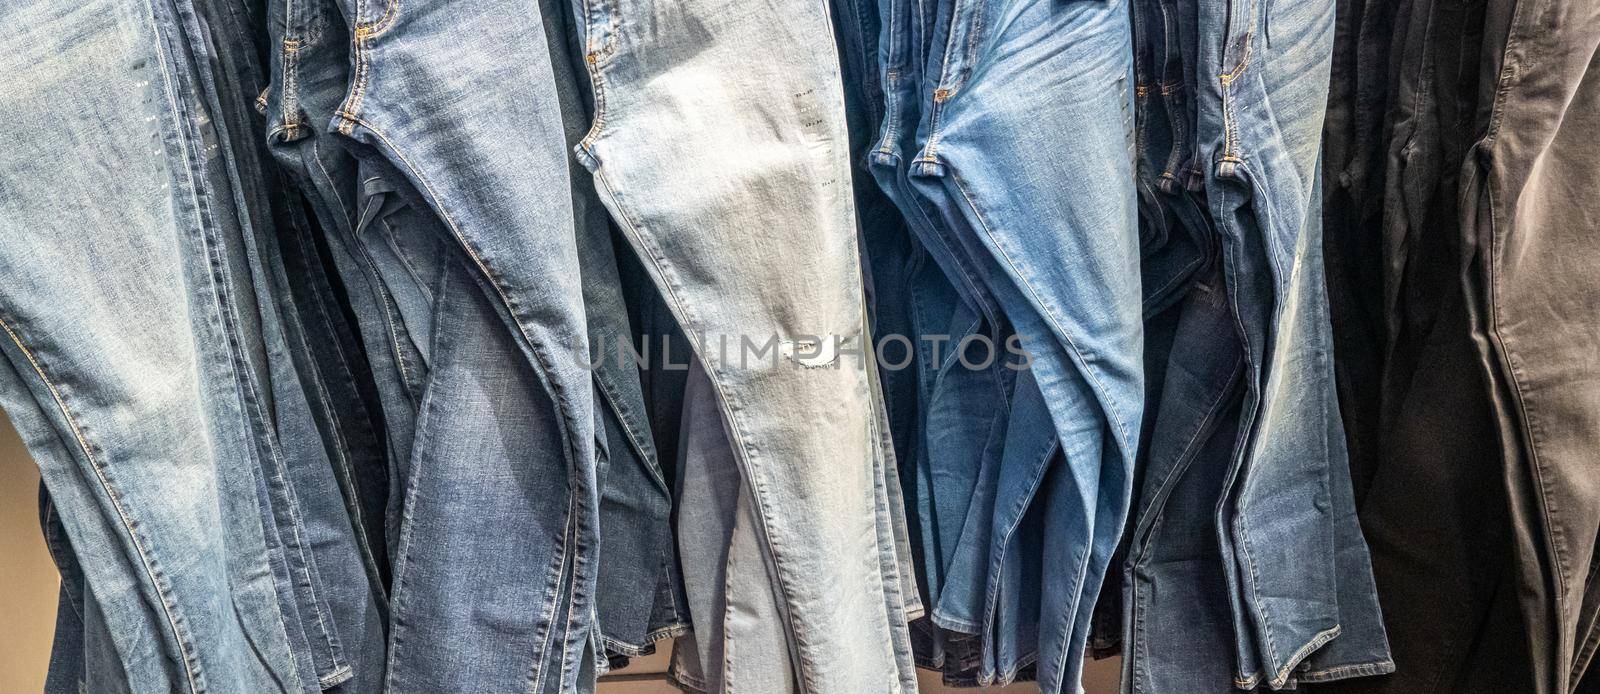 Jeans hanging on a rack. Row of denim pants.